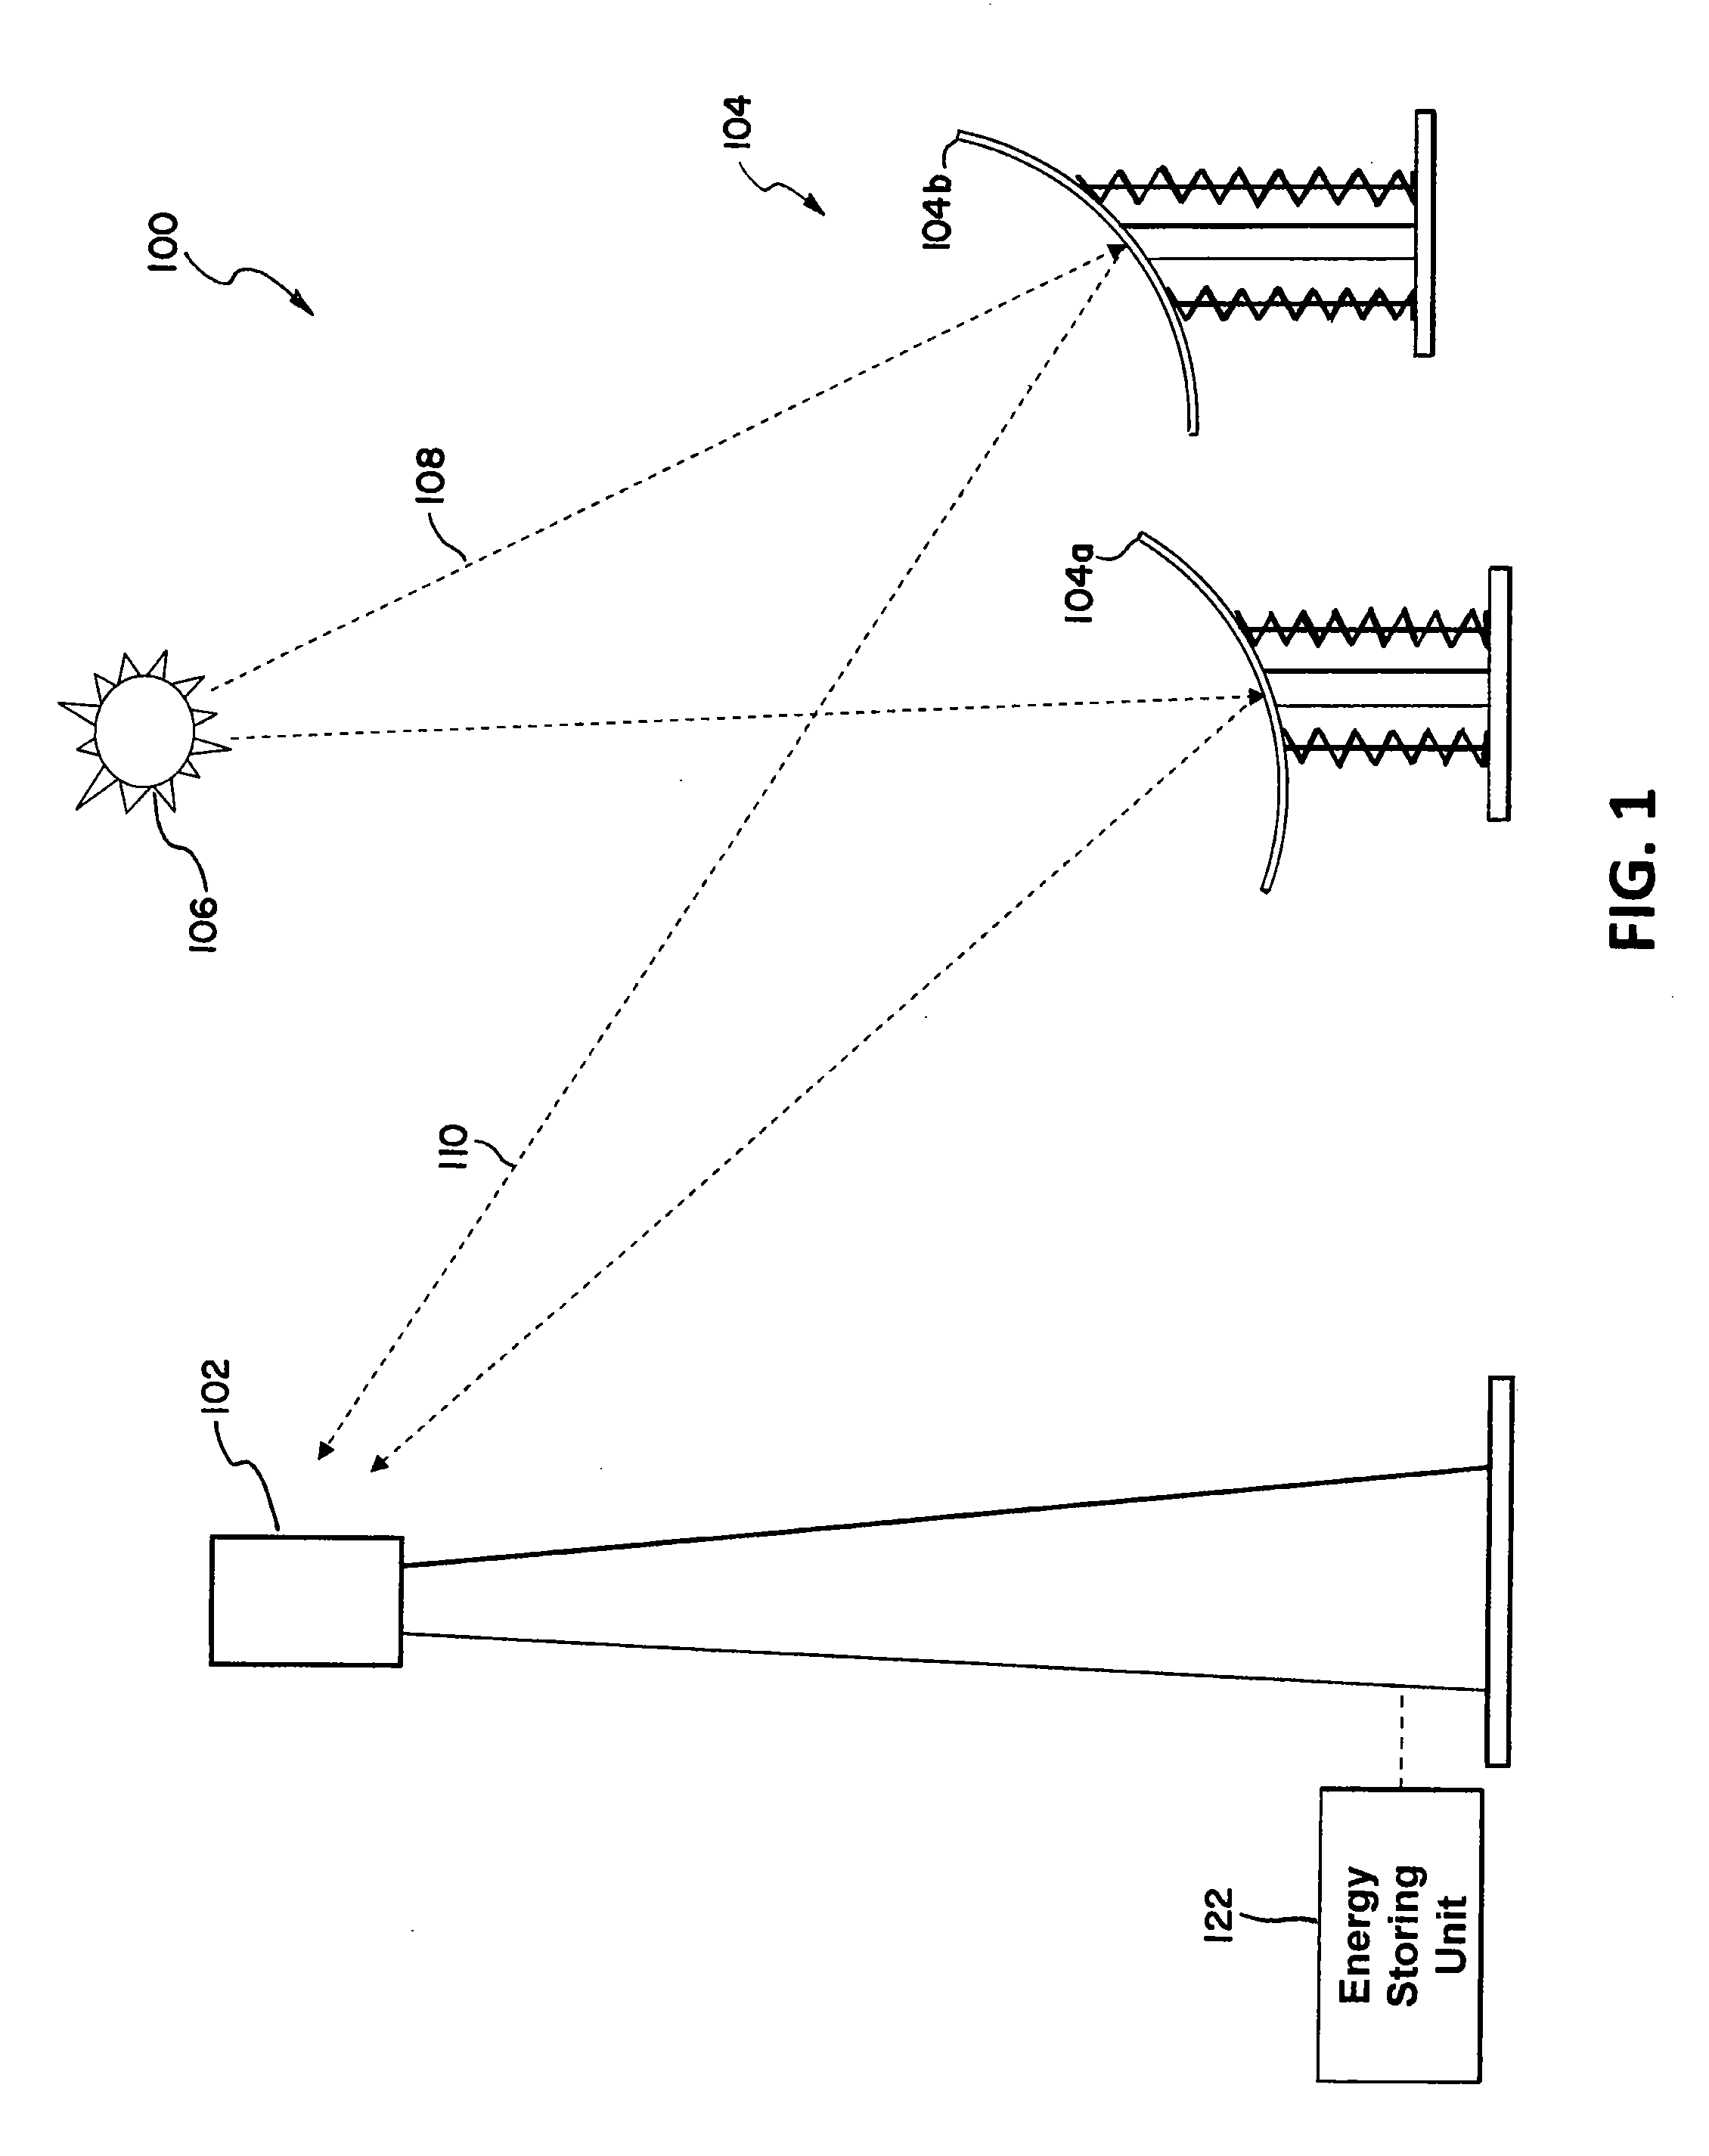 Method and apparatus to control a focal length of a curved reflector in real time